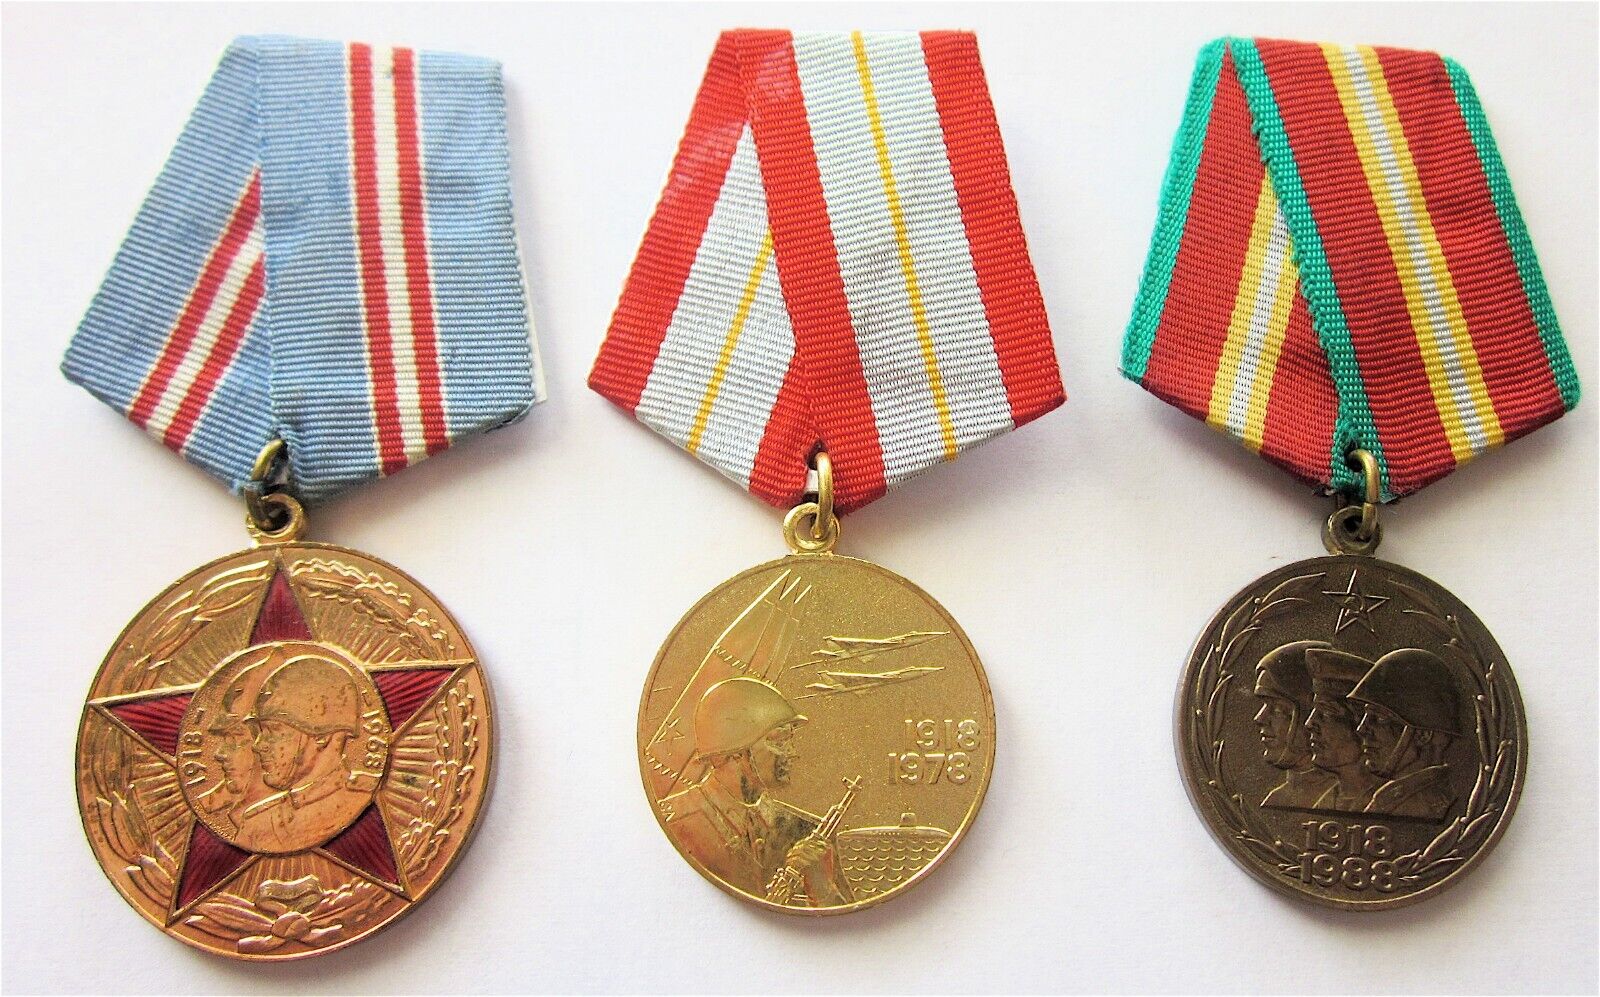 50 /1918-1968/, 60 /1978/, 70 YEARS OF SOVIET ARMY FOUNDATION 3 ORIGINAL MEDALS